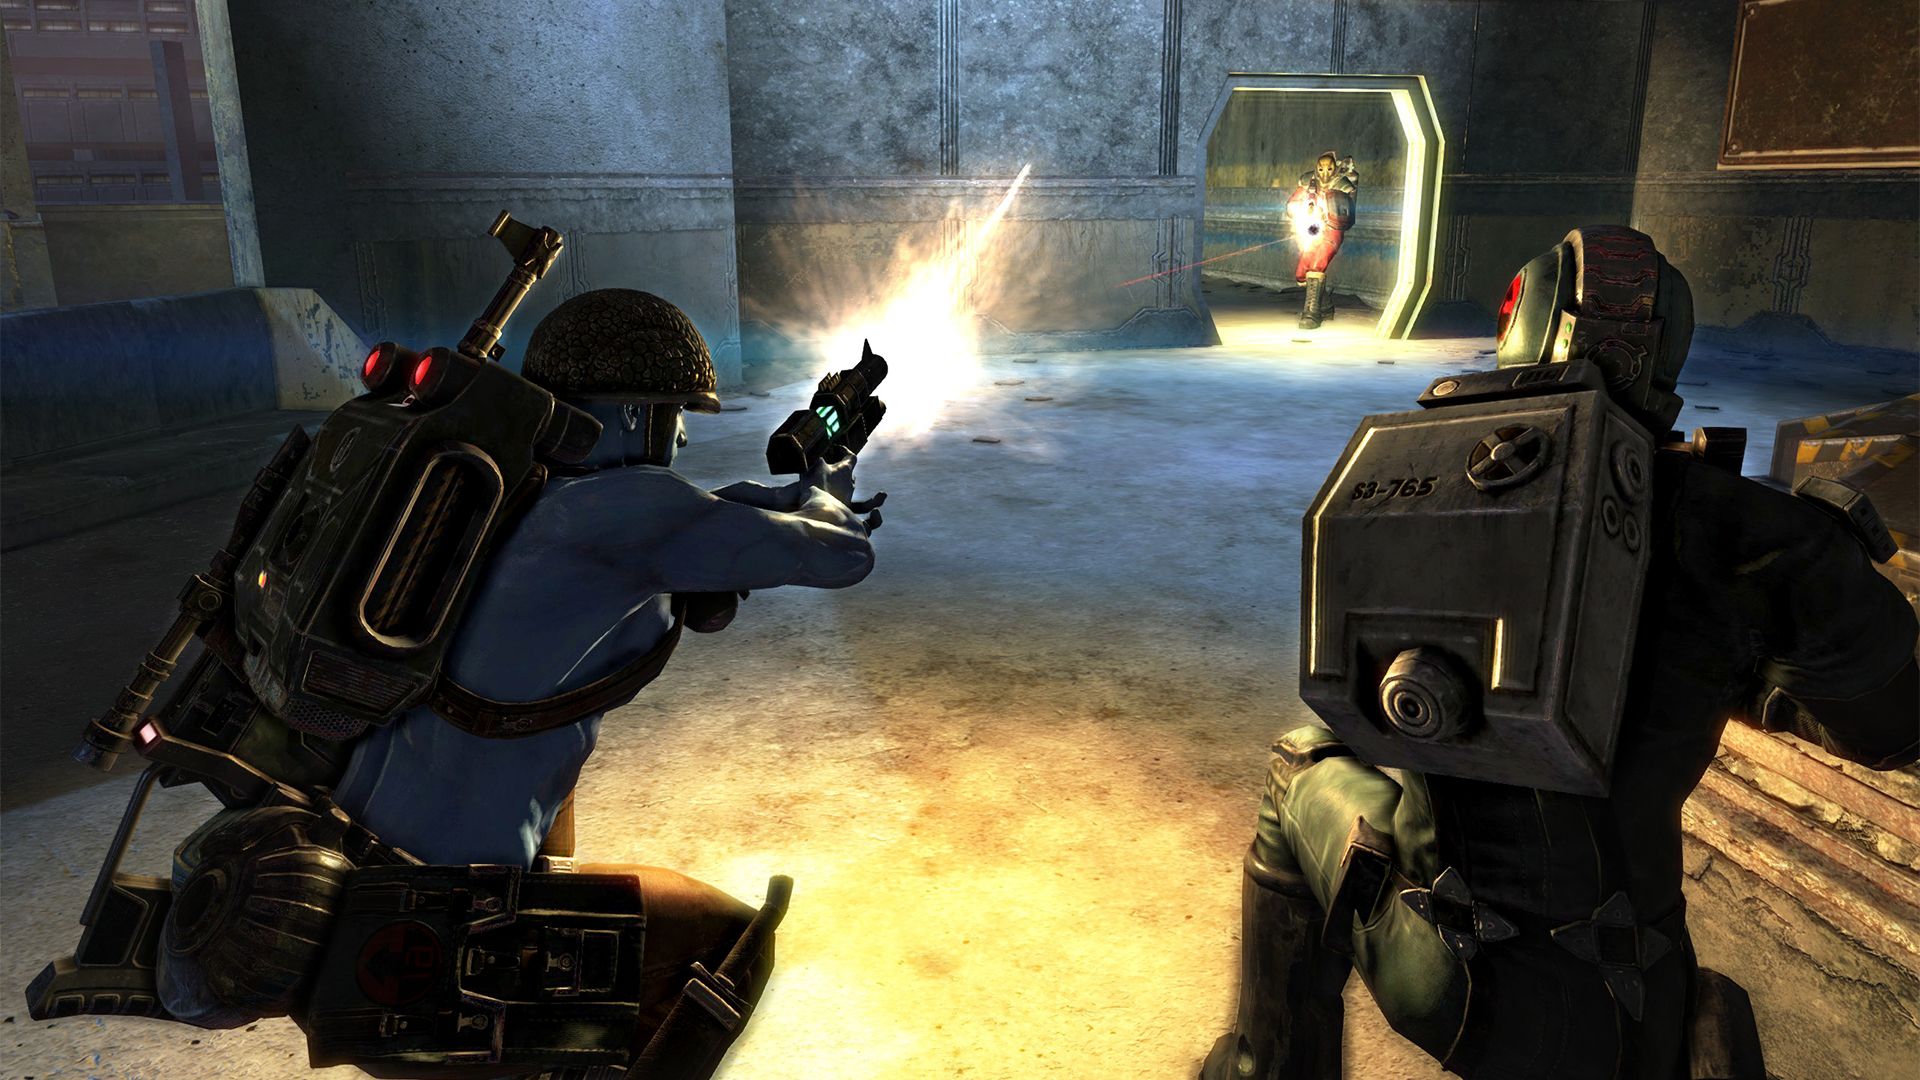 rogue trooper game